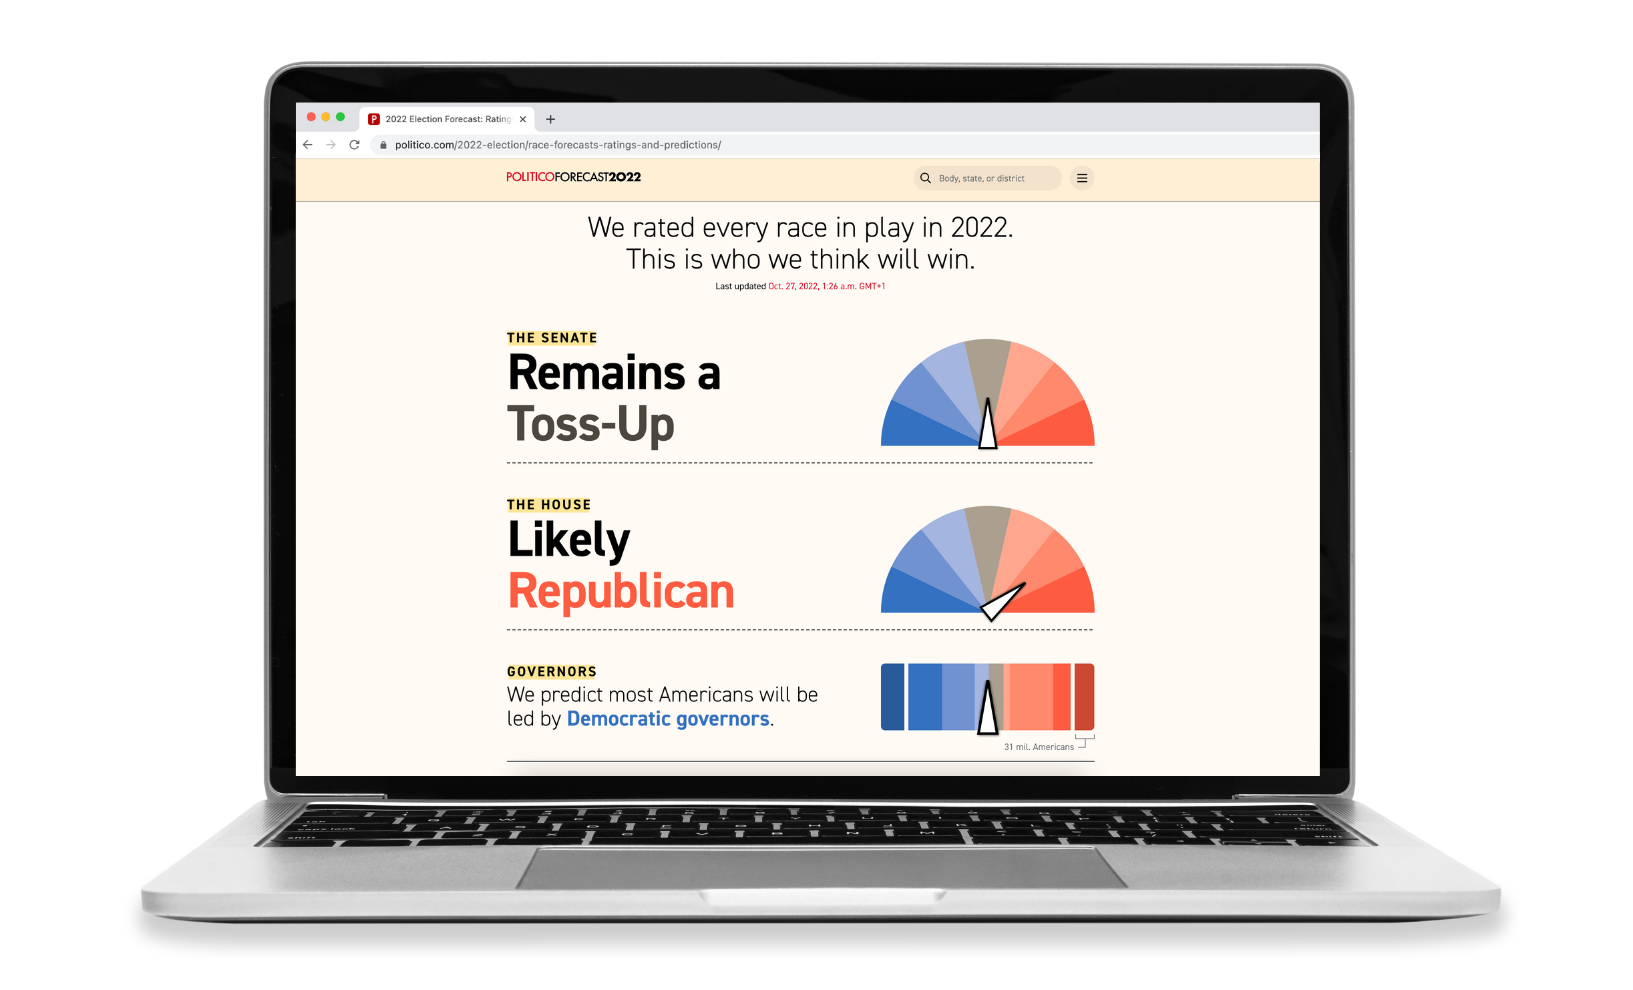 Politico</a> use gauges in their midterms coverage to forecast the results of each state